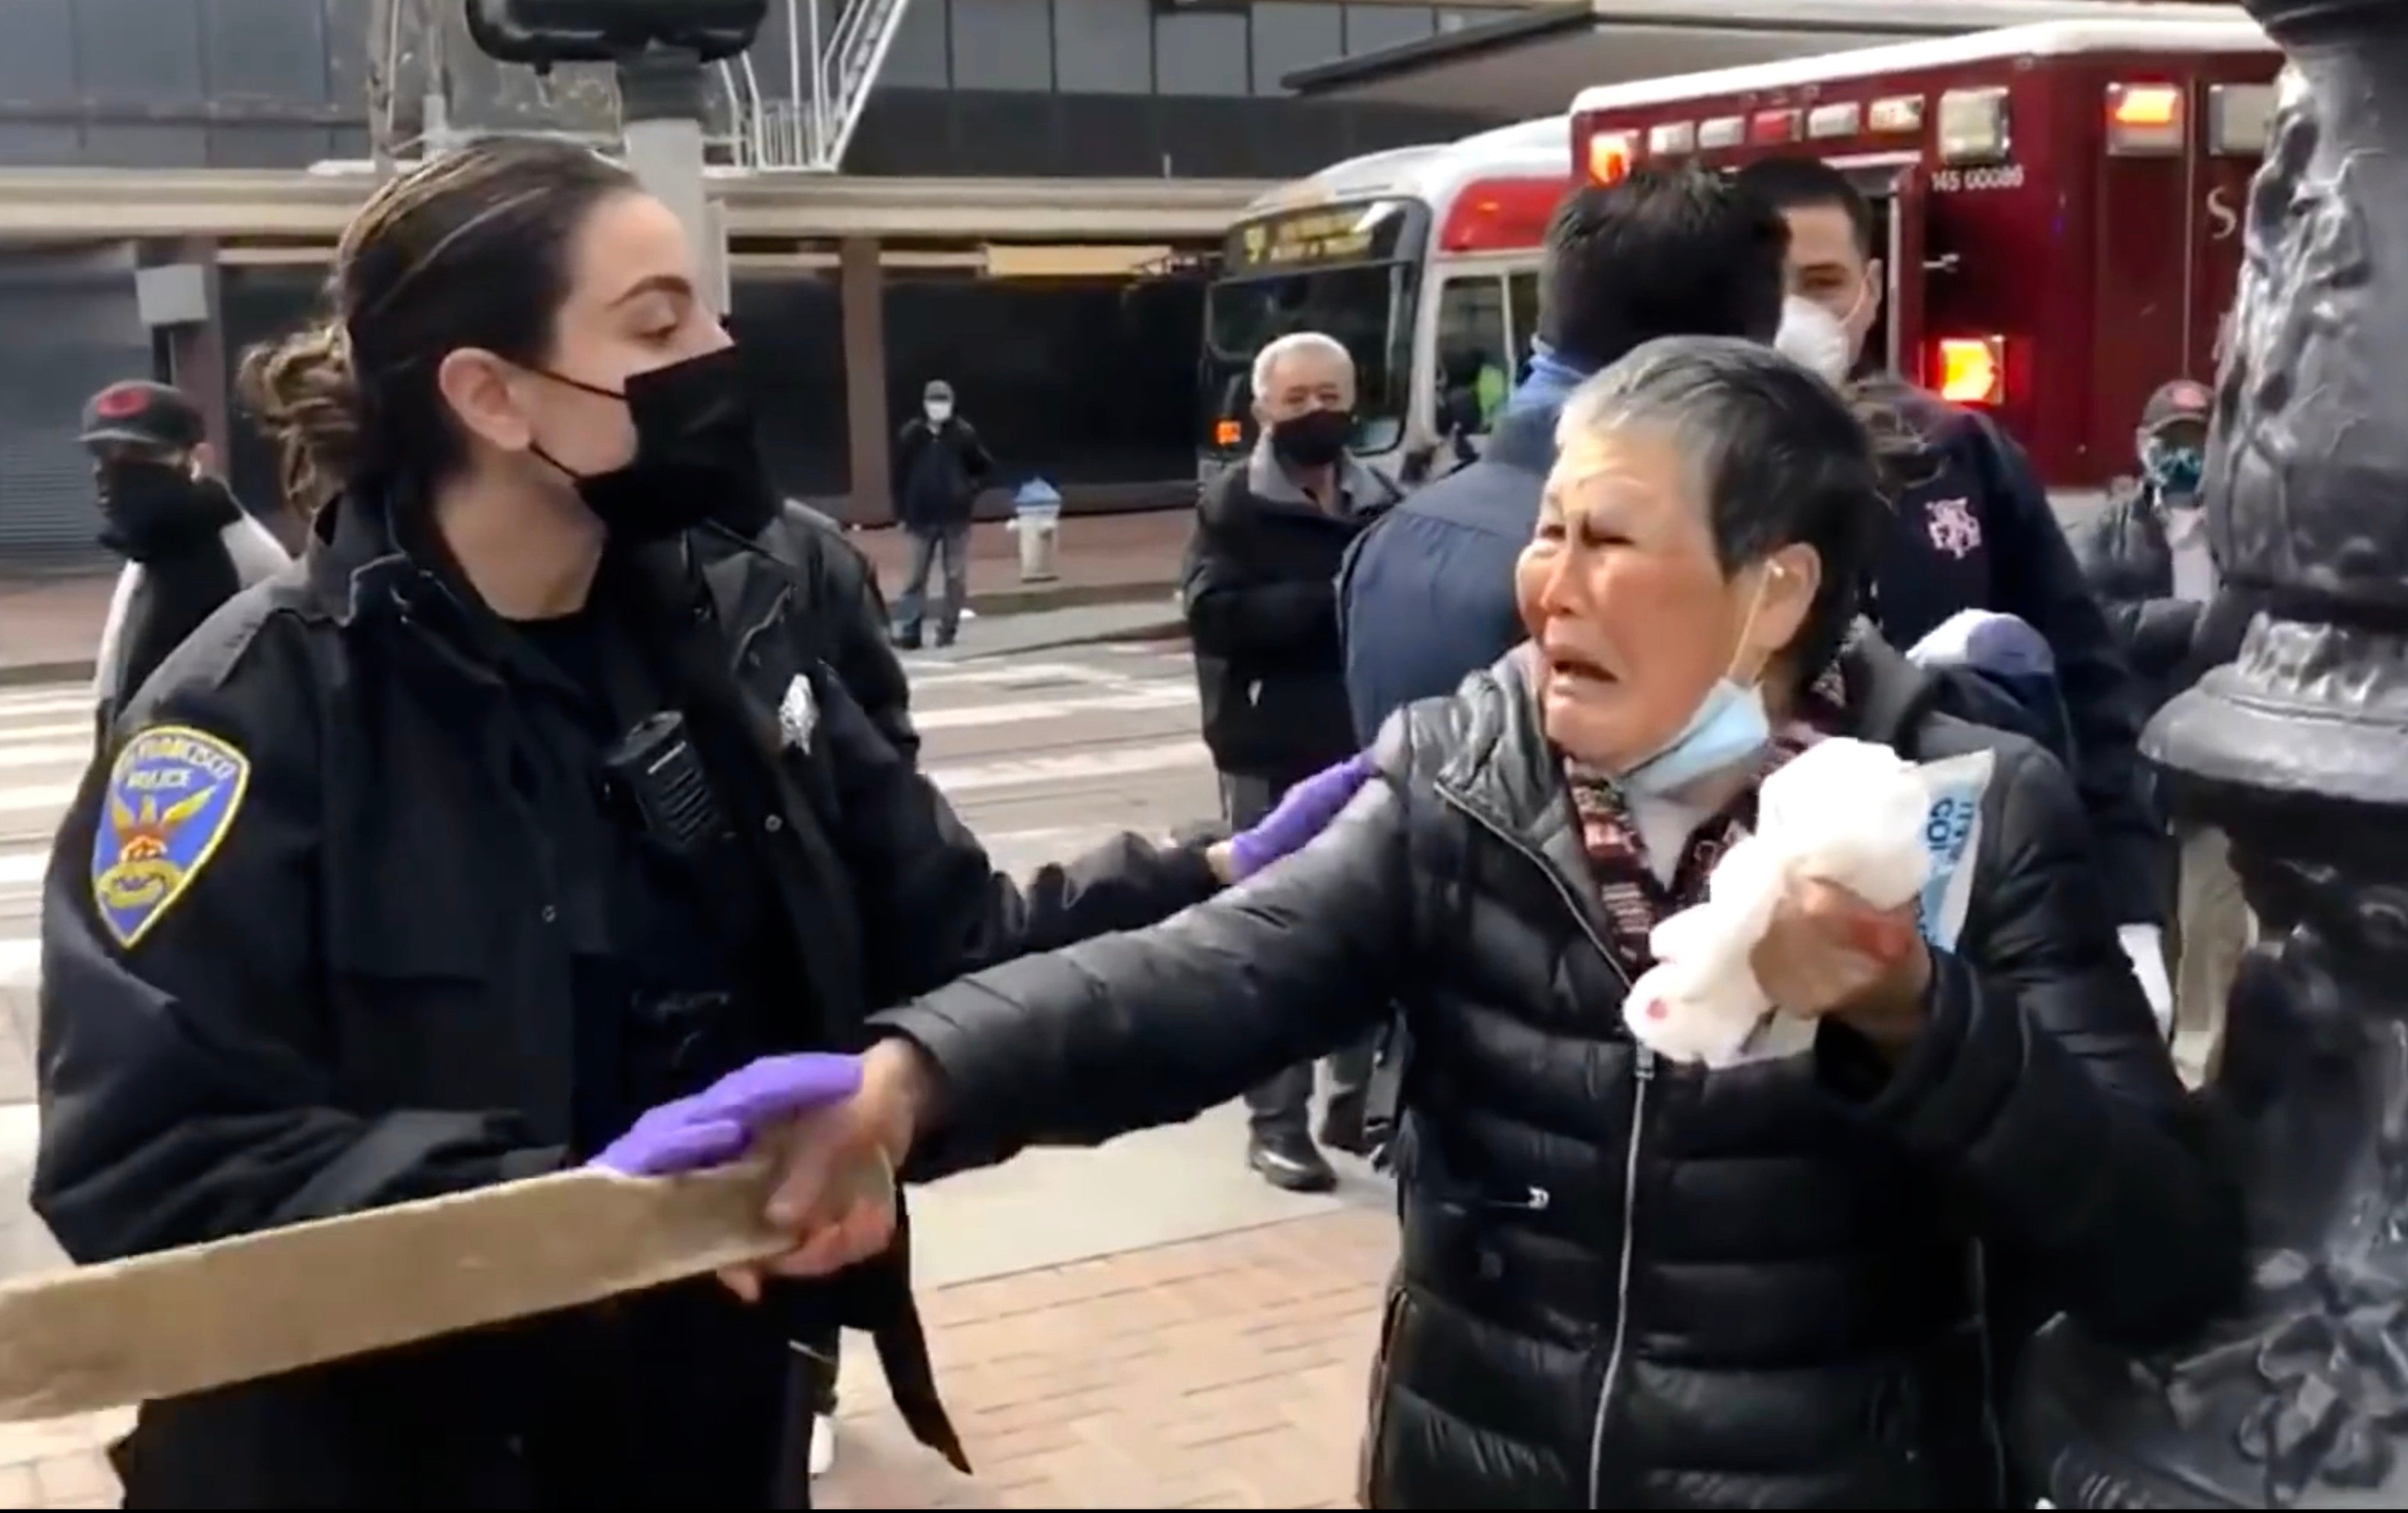 Xie Xiaozhen, a 76-year-old Chinese grandmother who fought off a violent attack in San Francisco with a wooden stick in March 2021, could not communicate with first responders as she only spoke Taishanese, which is related to Cantonese.